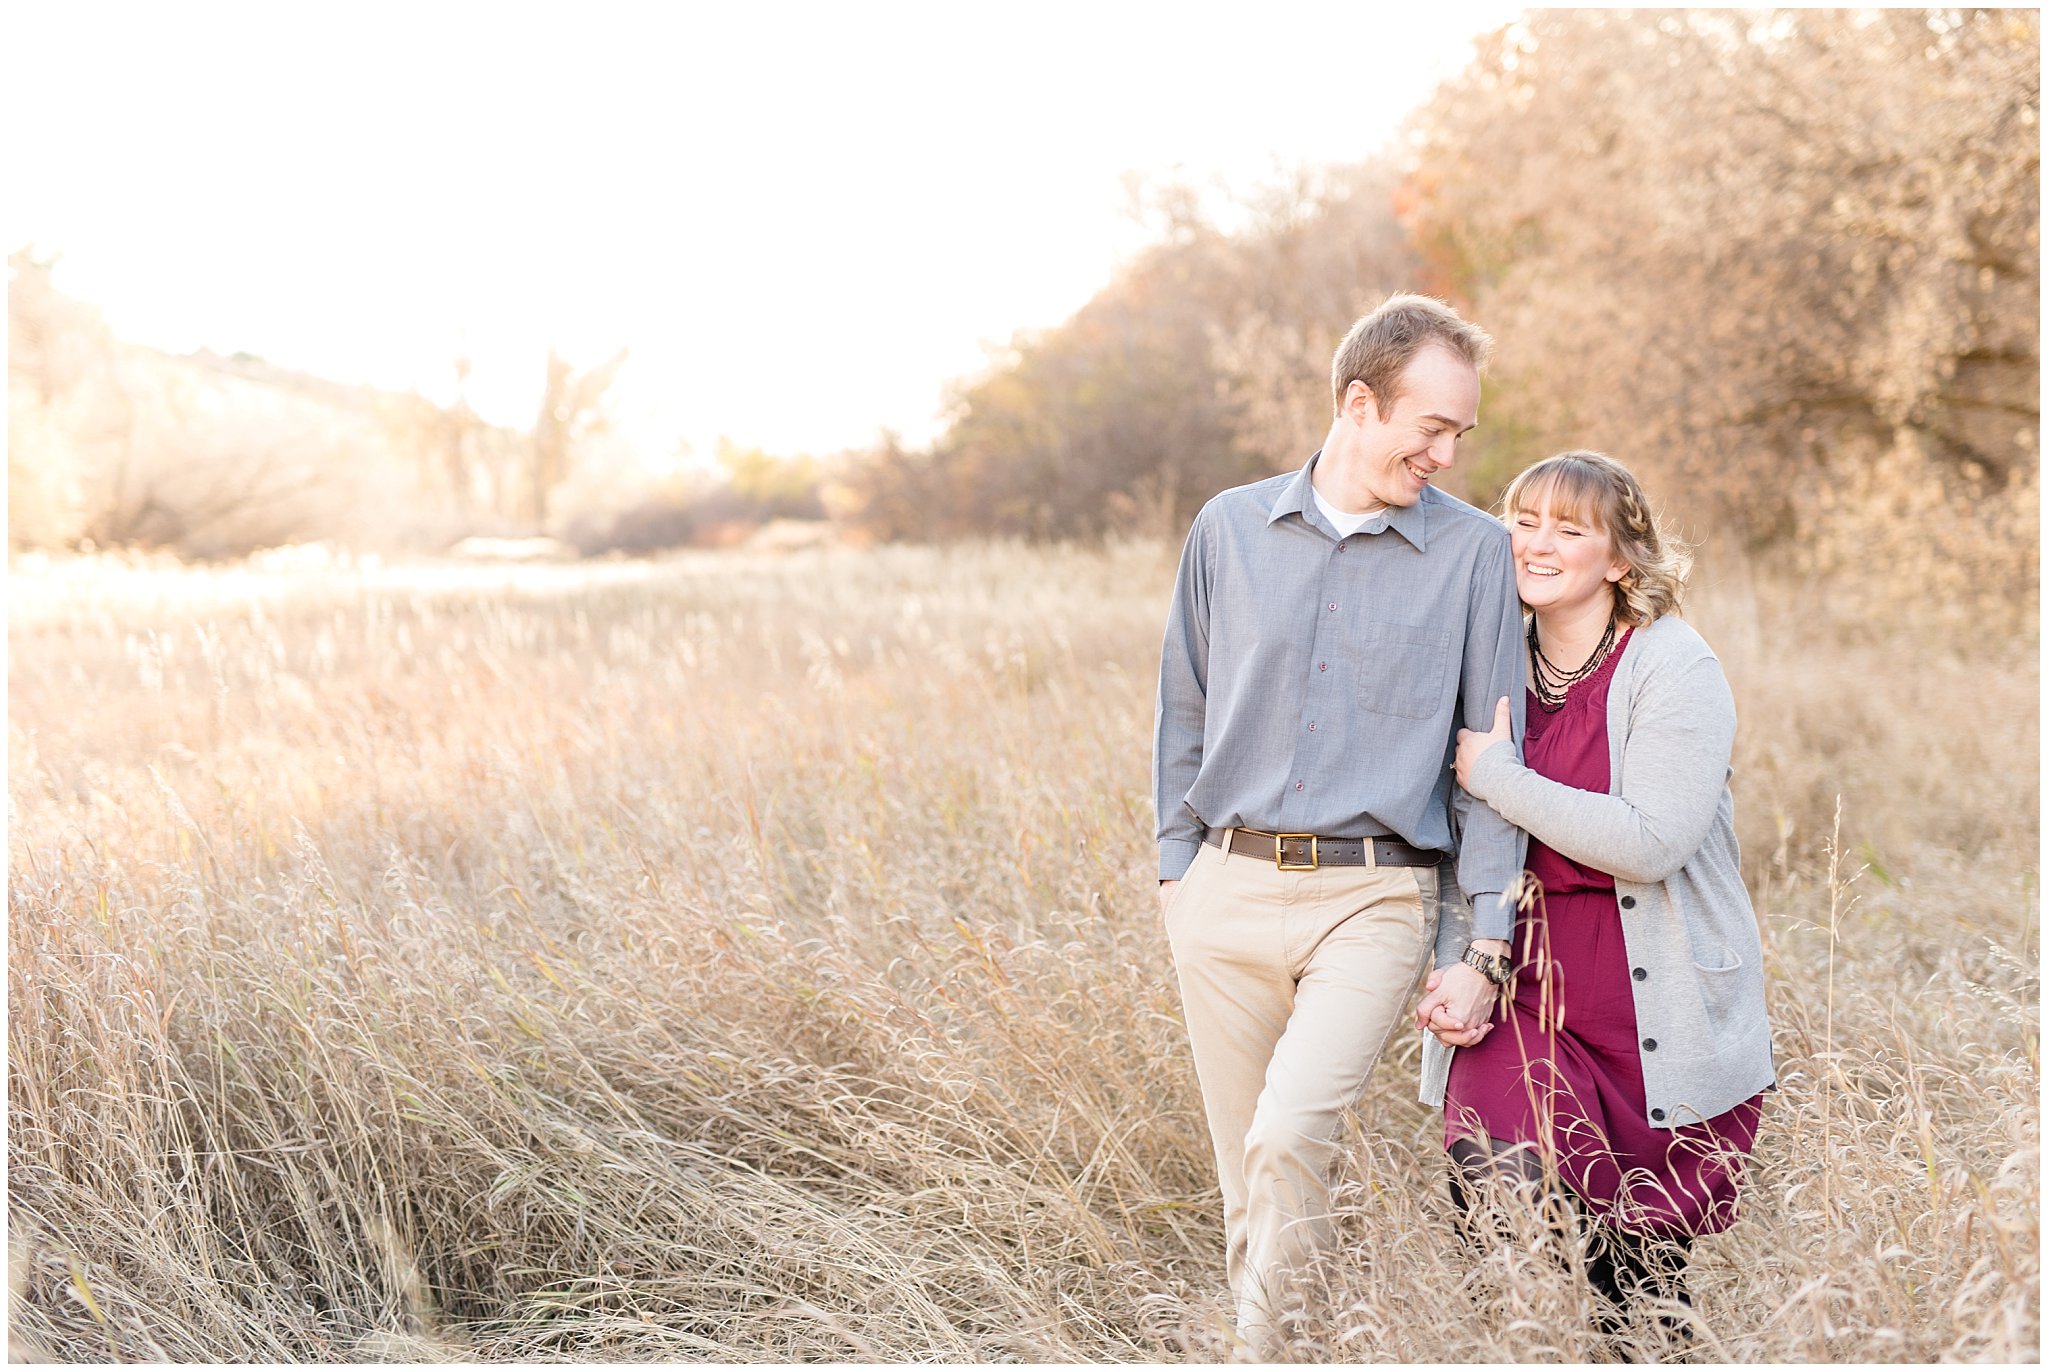 Couple walking and holding tight in a field | Davis County Fall Engagement | Utah Wedding Photographers | Jessie and Dallin